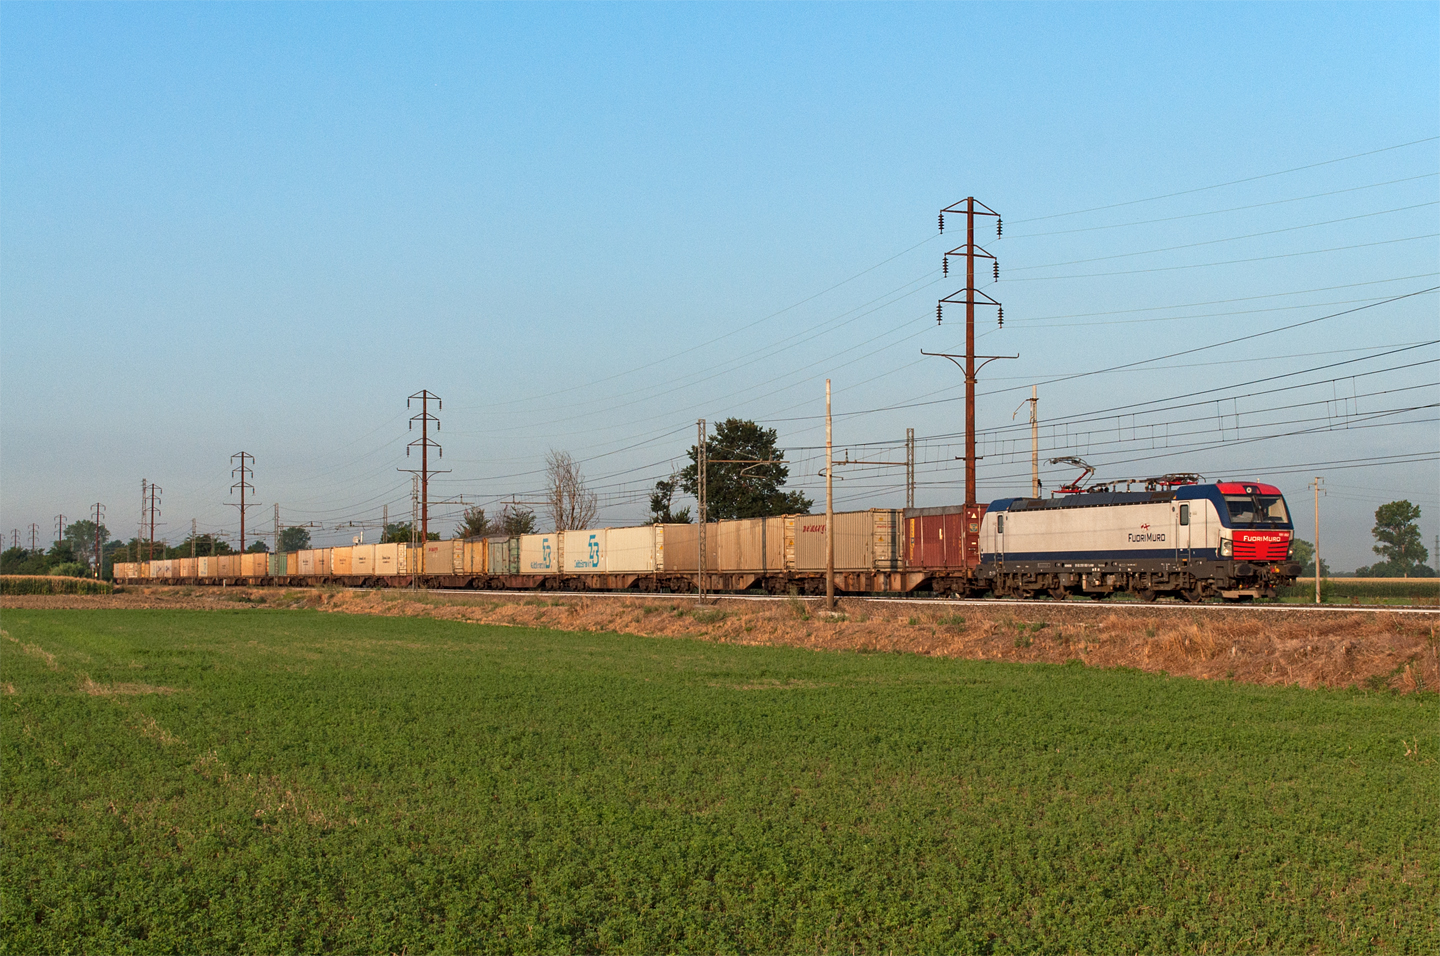 A freight train in Italy